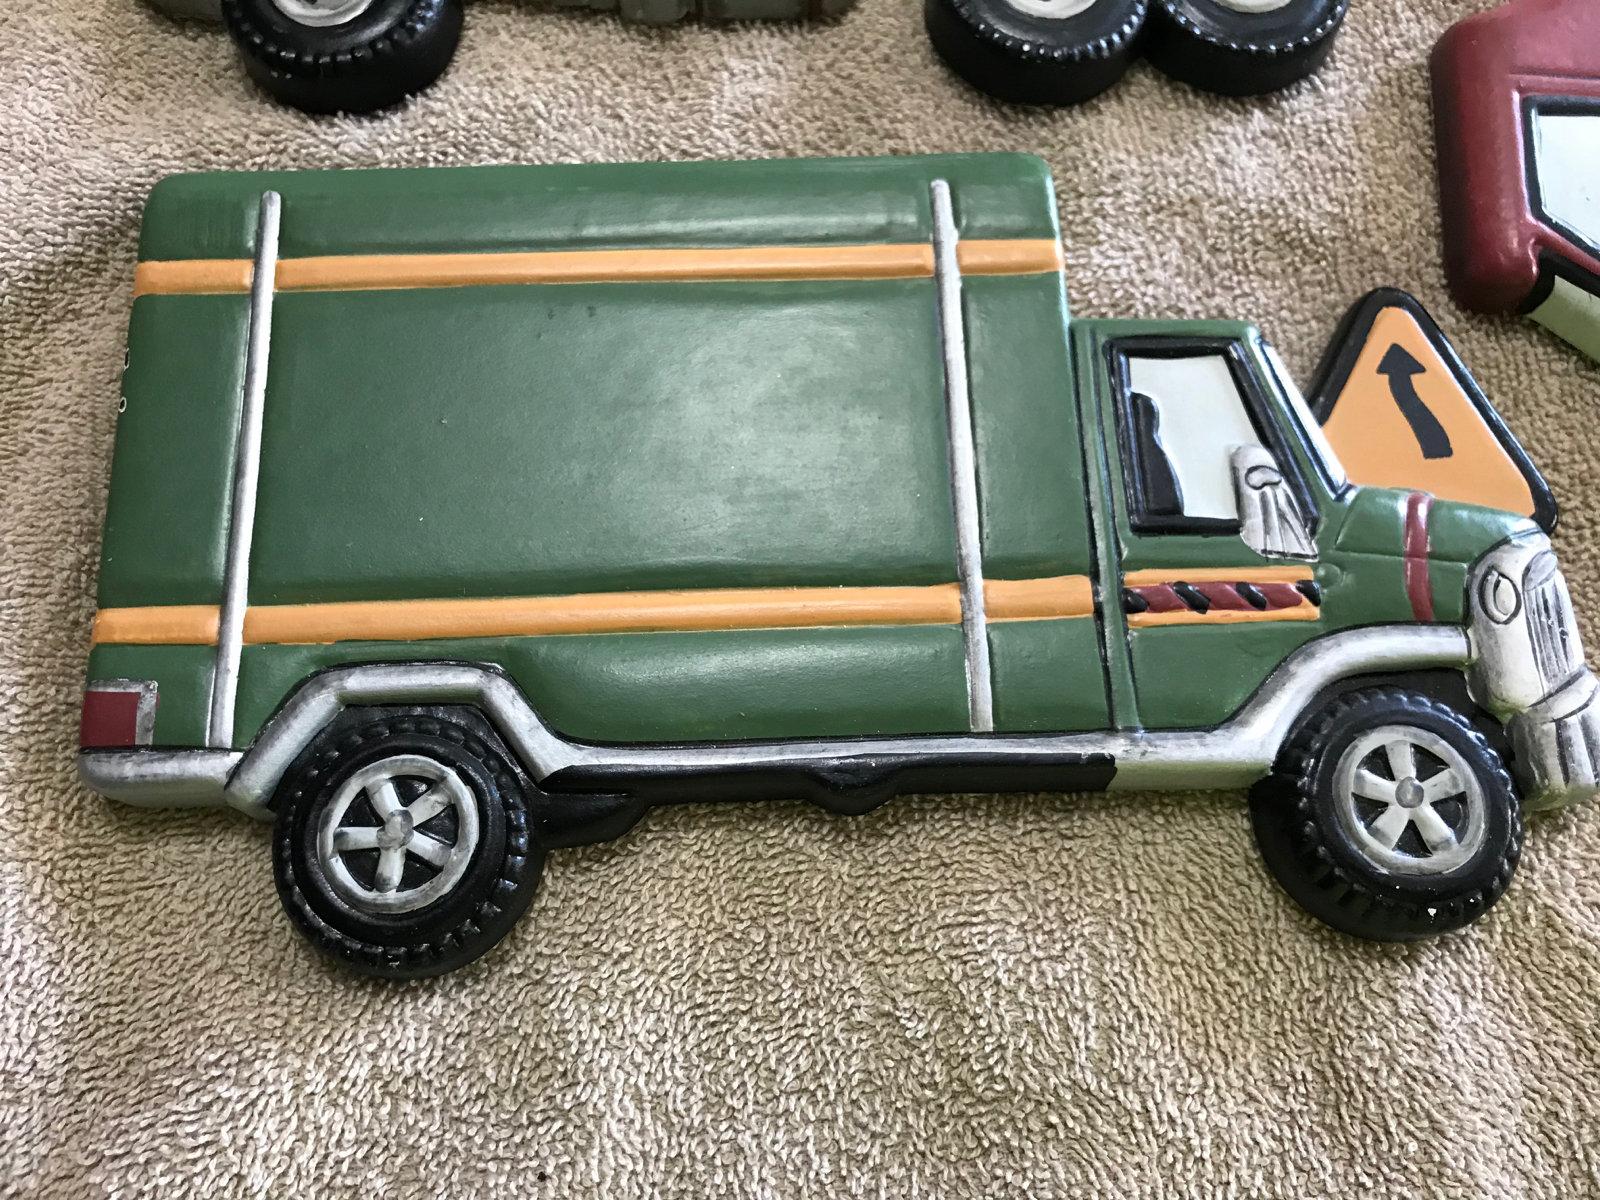 Wall hanging trucks, approx 8 inches long each